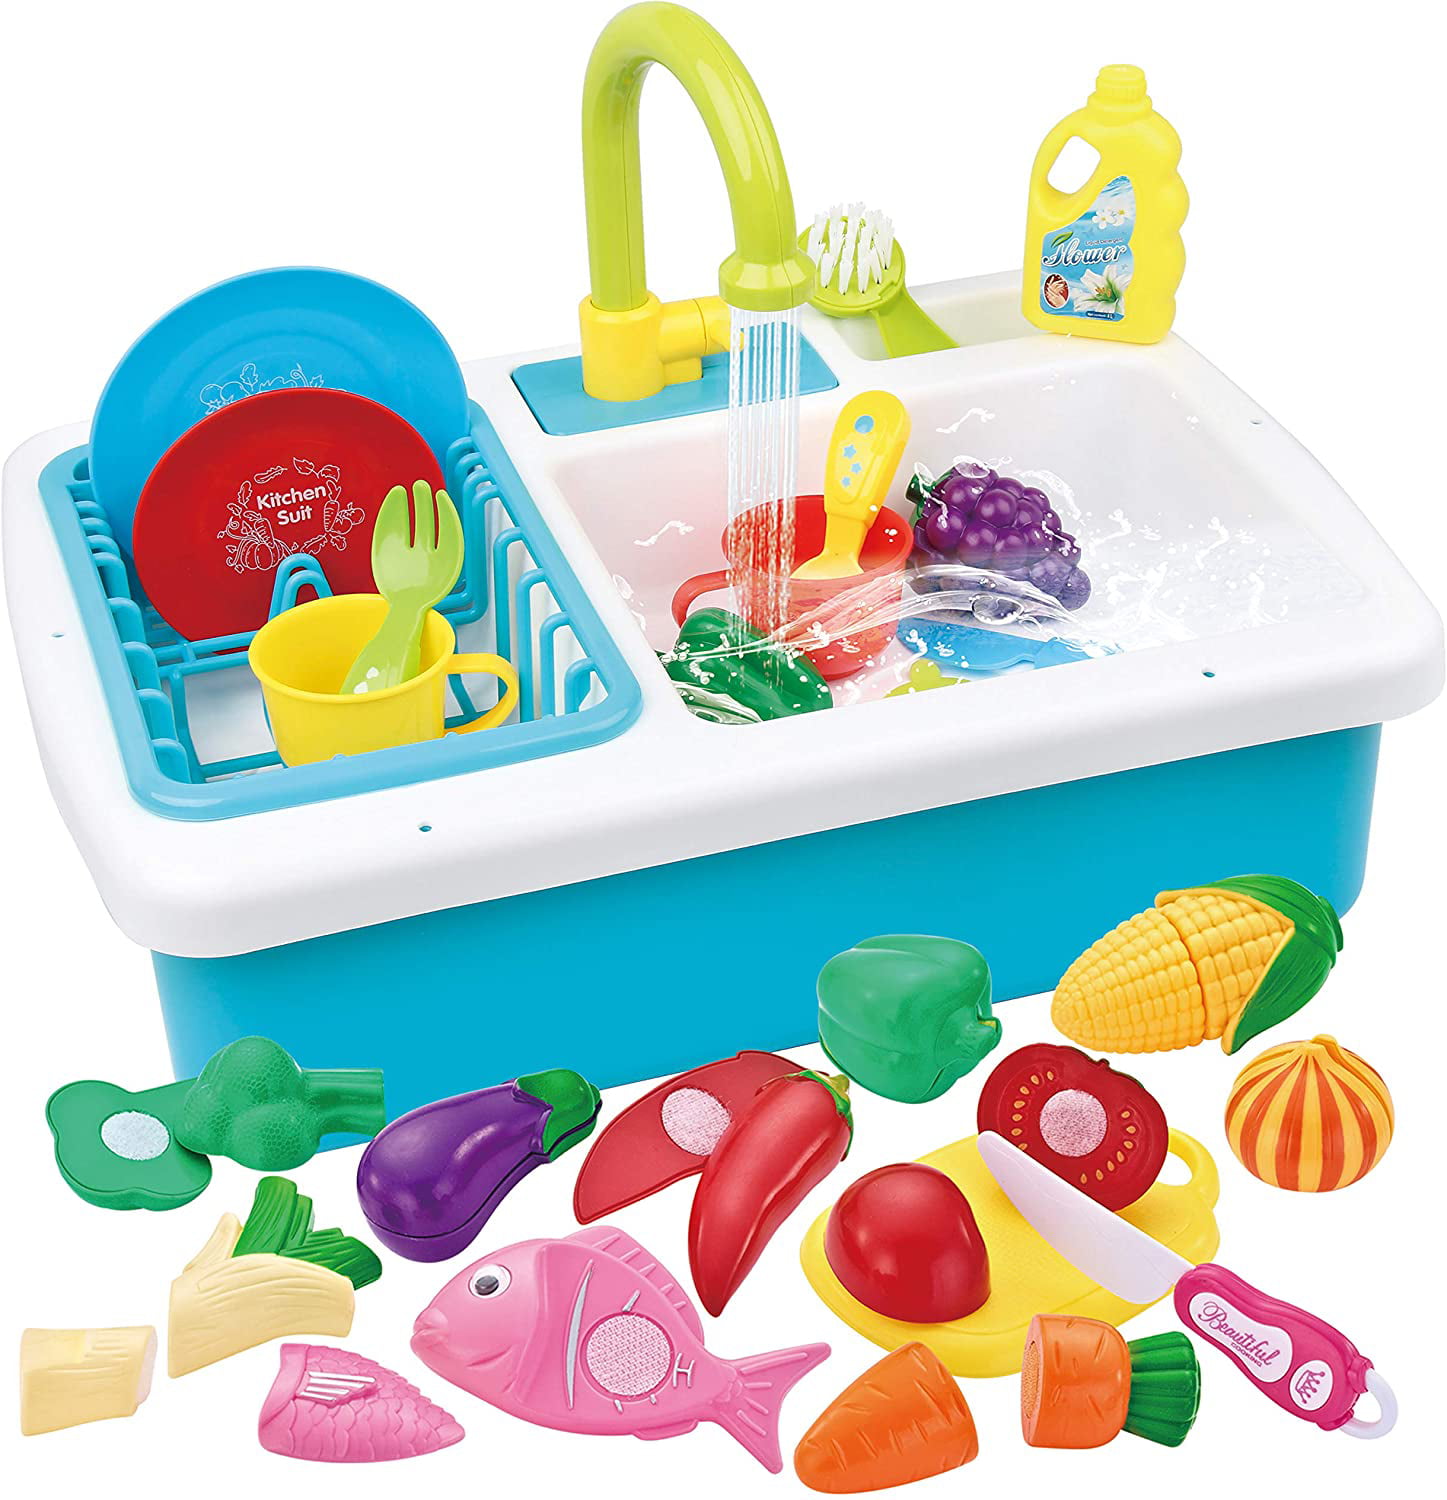 PlayGo Wash-up Kitchen Sink With Real Running Water Toy Dishes Kids Play 25 Pcs for sale online 